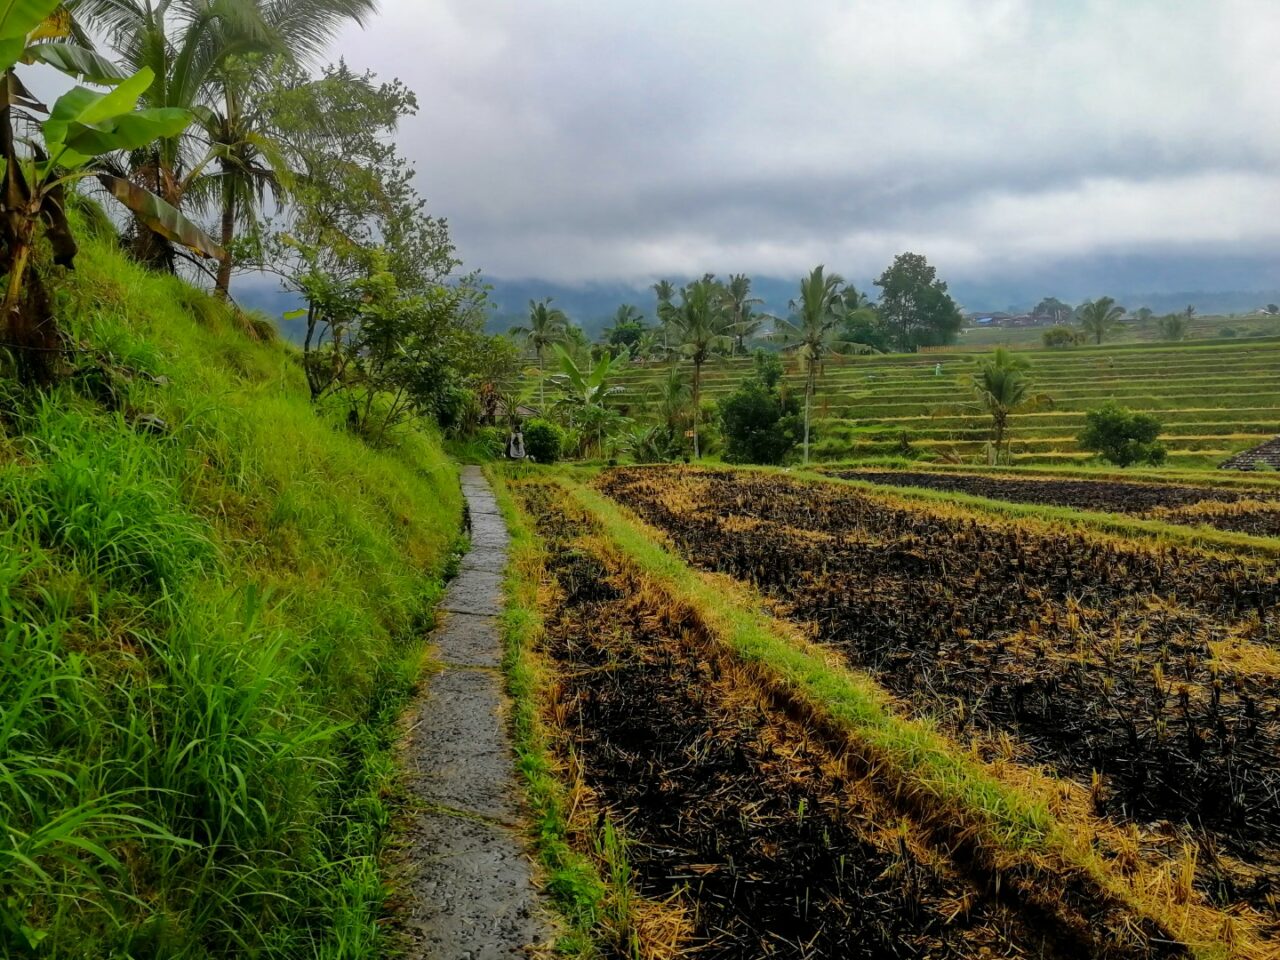 Rice field burned after the harvest, in the famous Jatiluwih ric